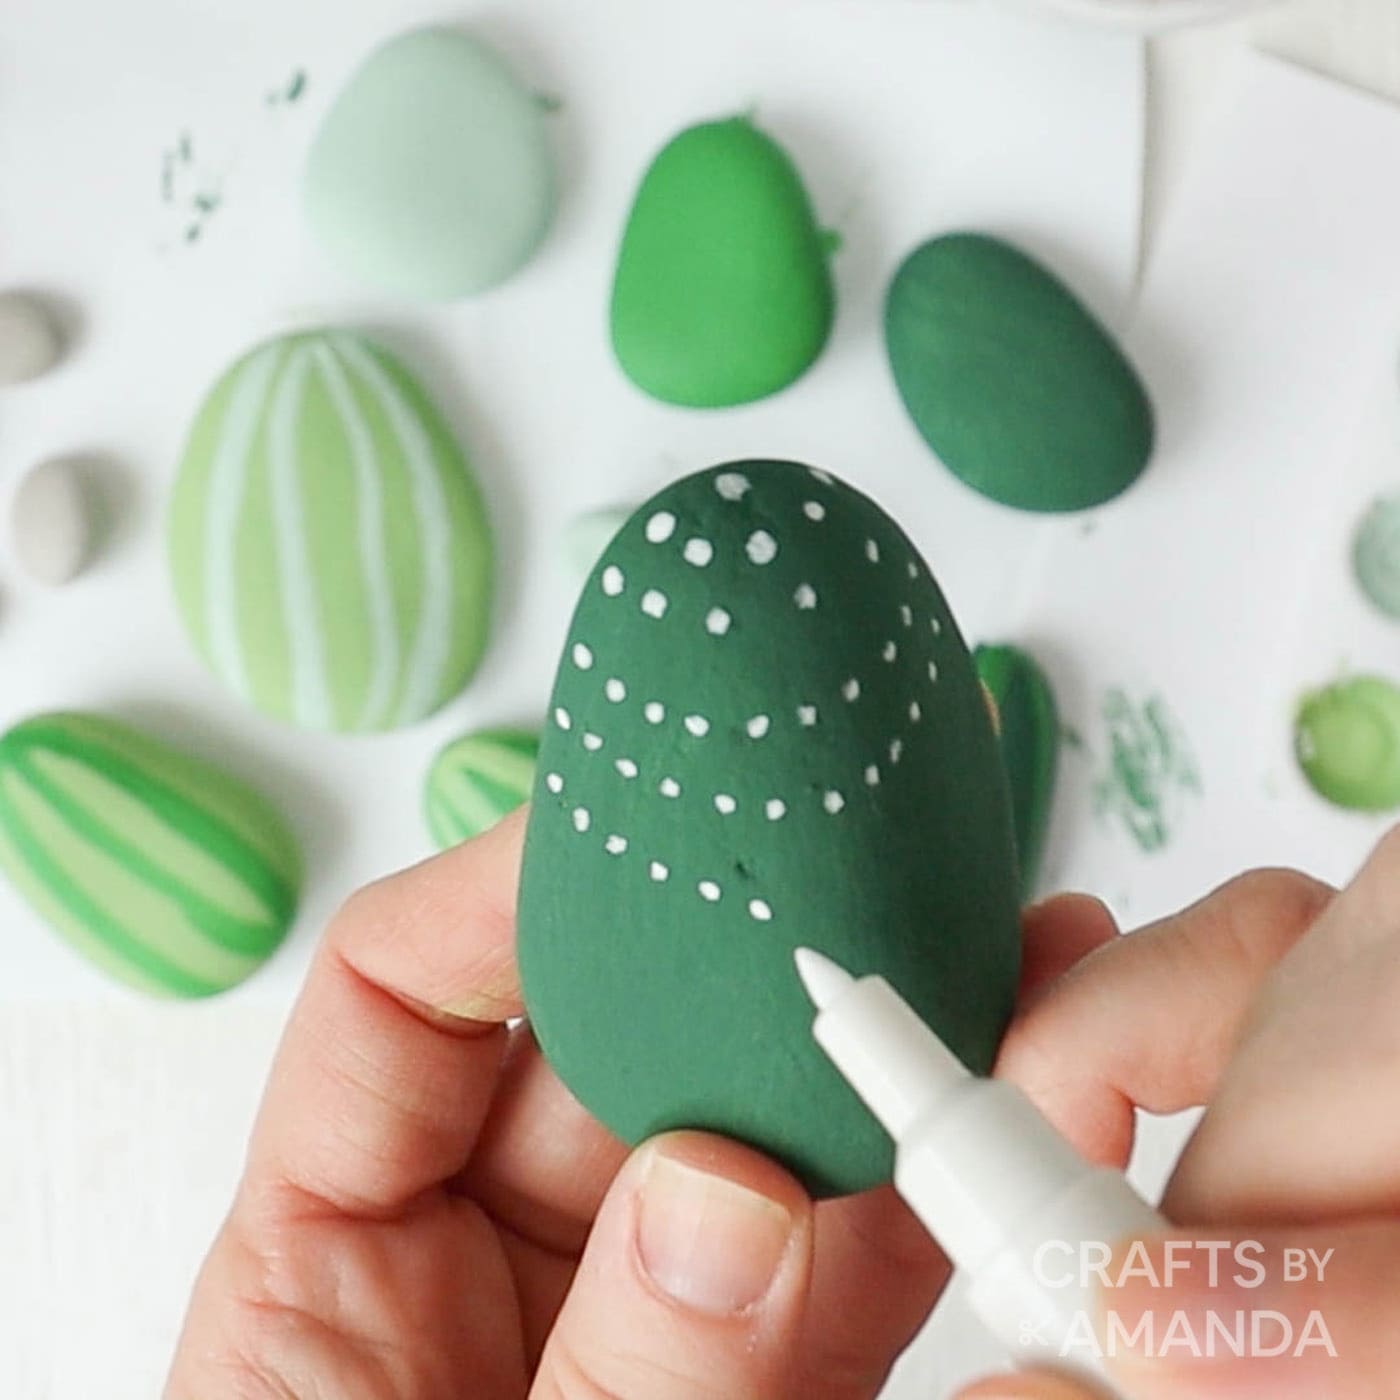 adding white spots to a green rock